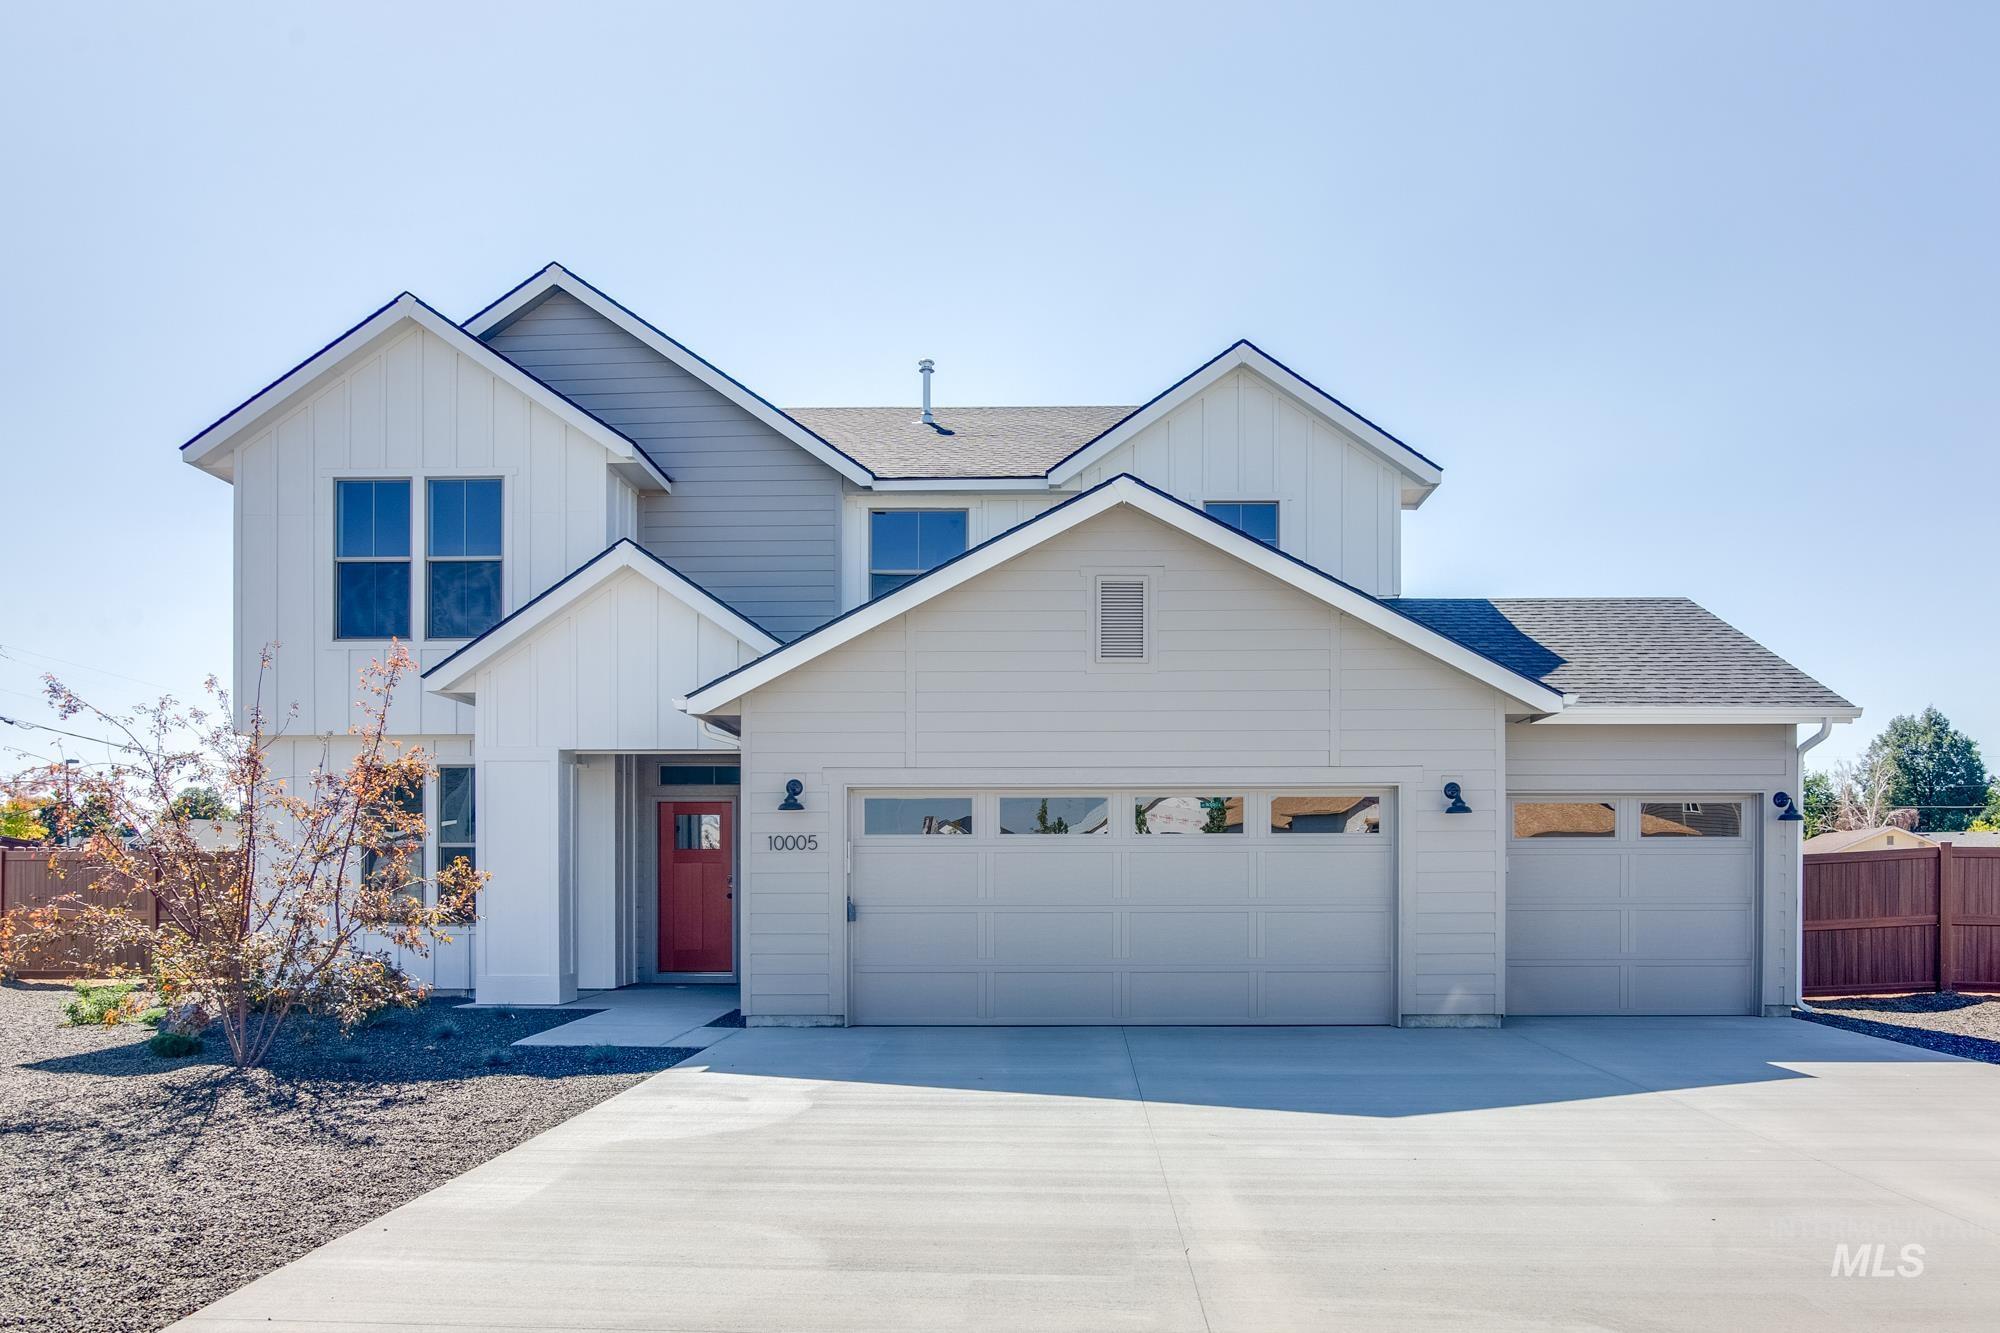 8165 E Sunray Dr, Nampa, Idaho 83687, 4 Bedrooms, 2.5 Bathrooms, Residential For Sale, Price $469,990,MLS 98907694